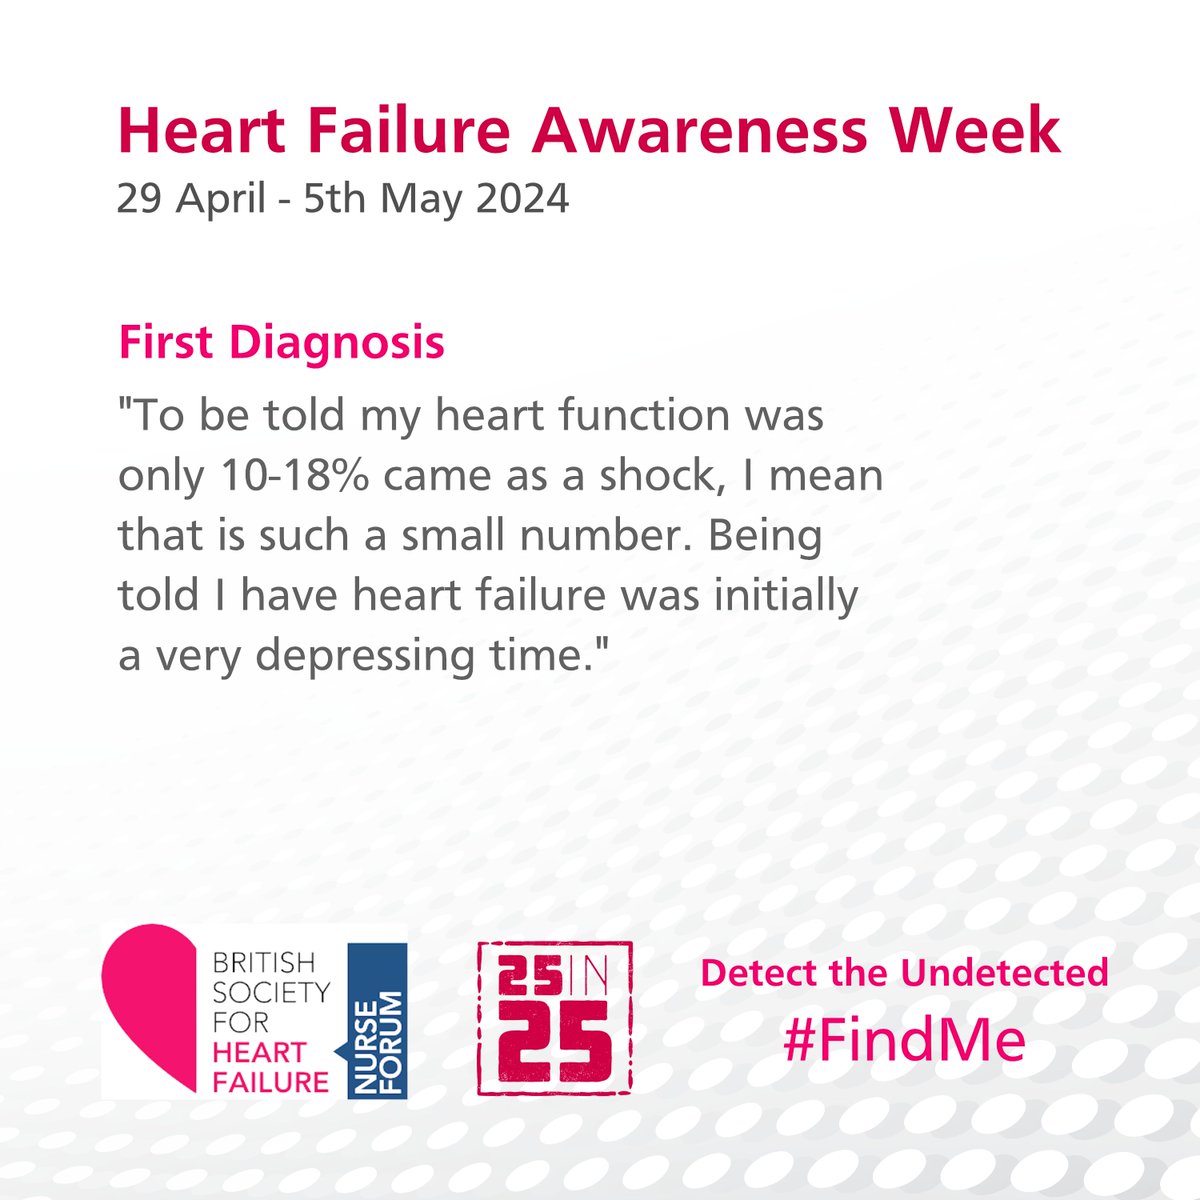 It's Heart Failure Awareness Week! All through the week we will follow the journey of John. Today John tells us about being told he has HF.
Link for full story.
members.bsh.org.uk/blog/view/Hear…
#FindMe #DetectTheUndetected #25in25 #FreedomFromFailure